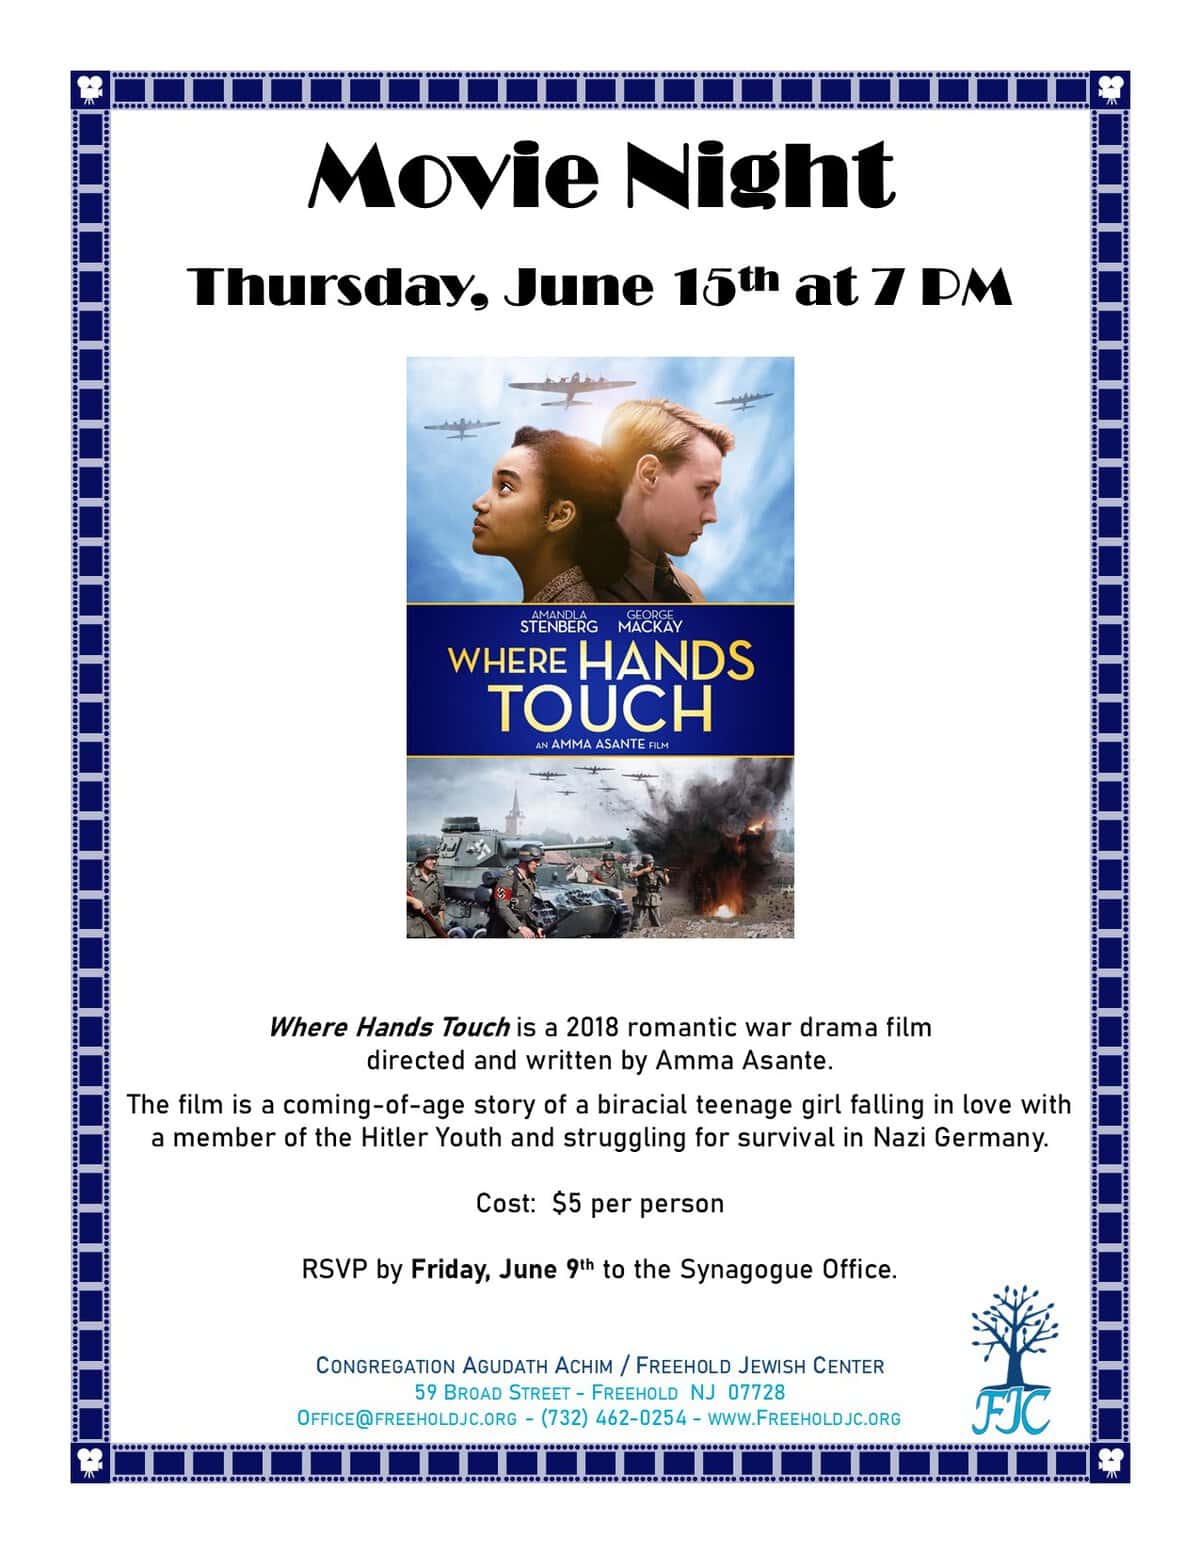 Movie Night - "Where Hands Touch"